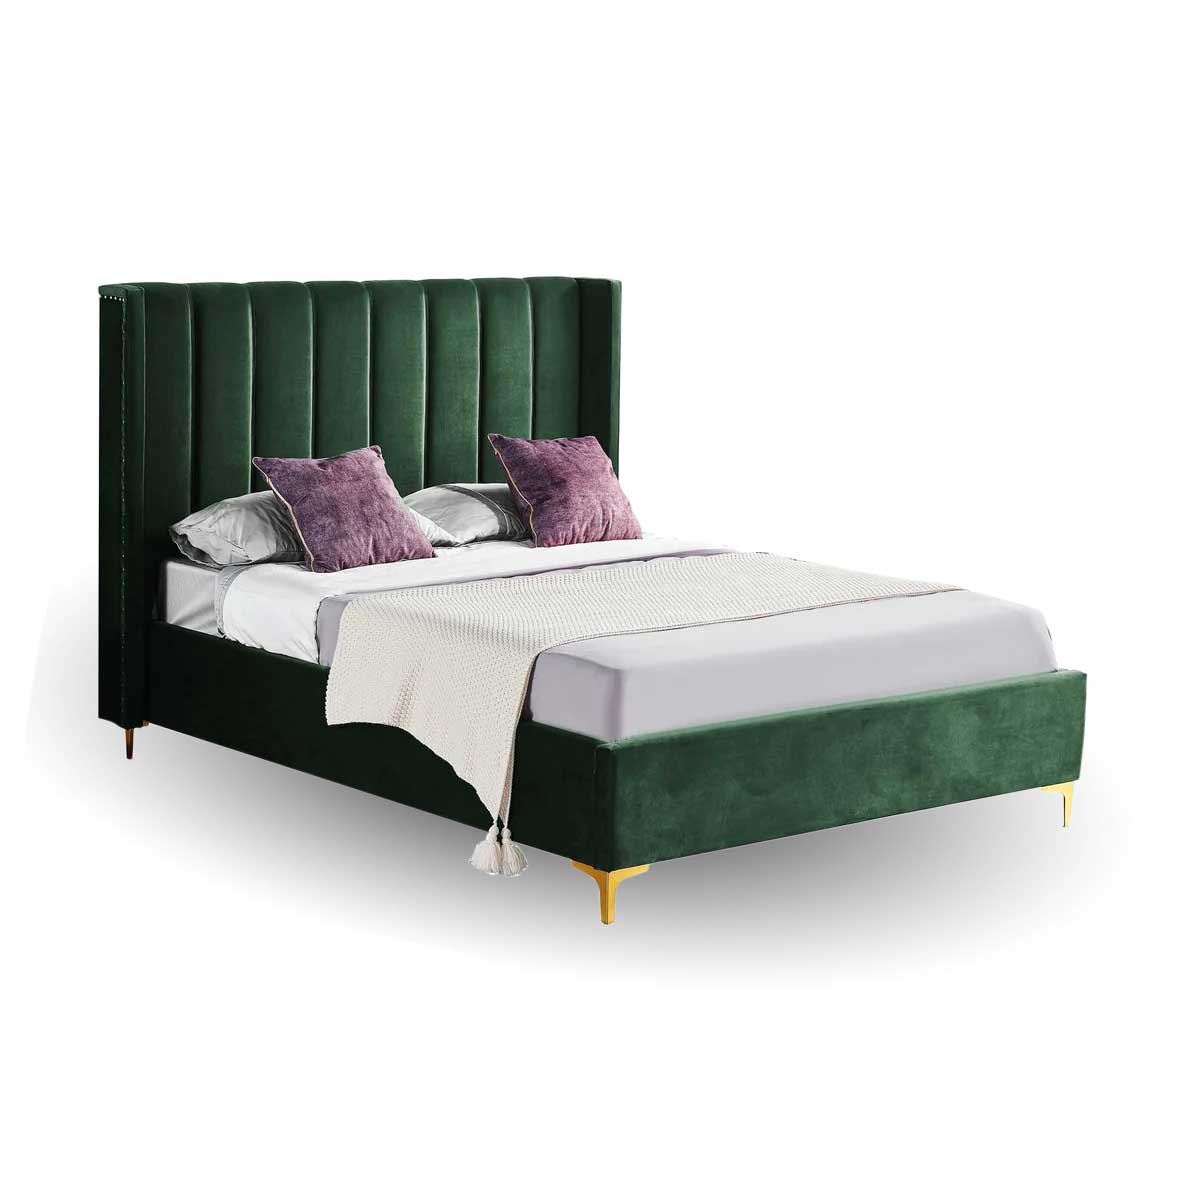 Colorado Dark Green Bed Frame - 2 Sizes Available